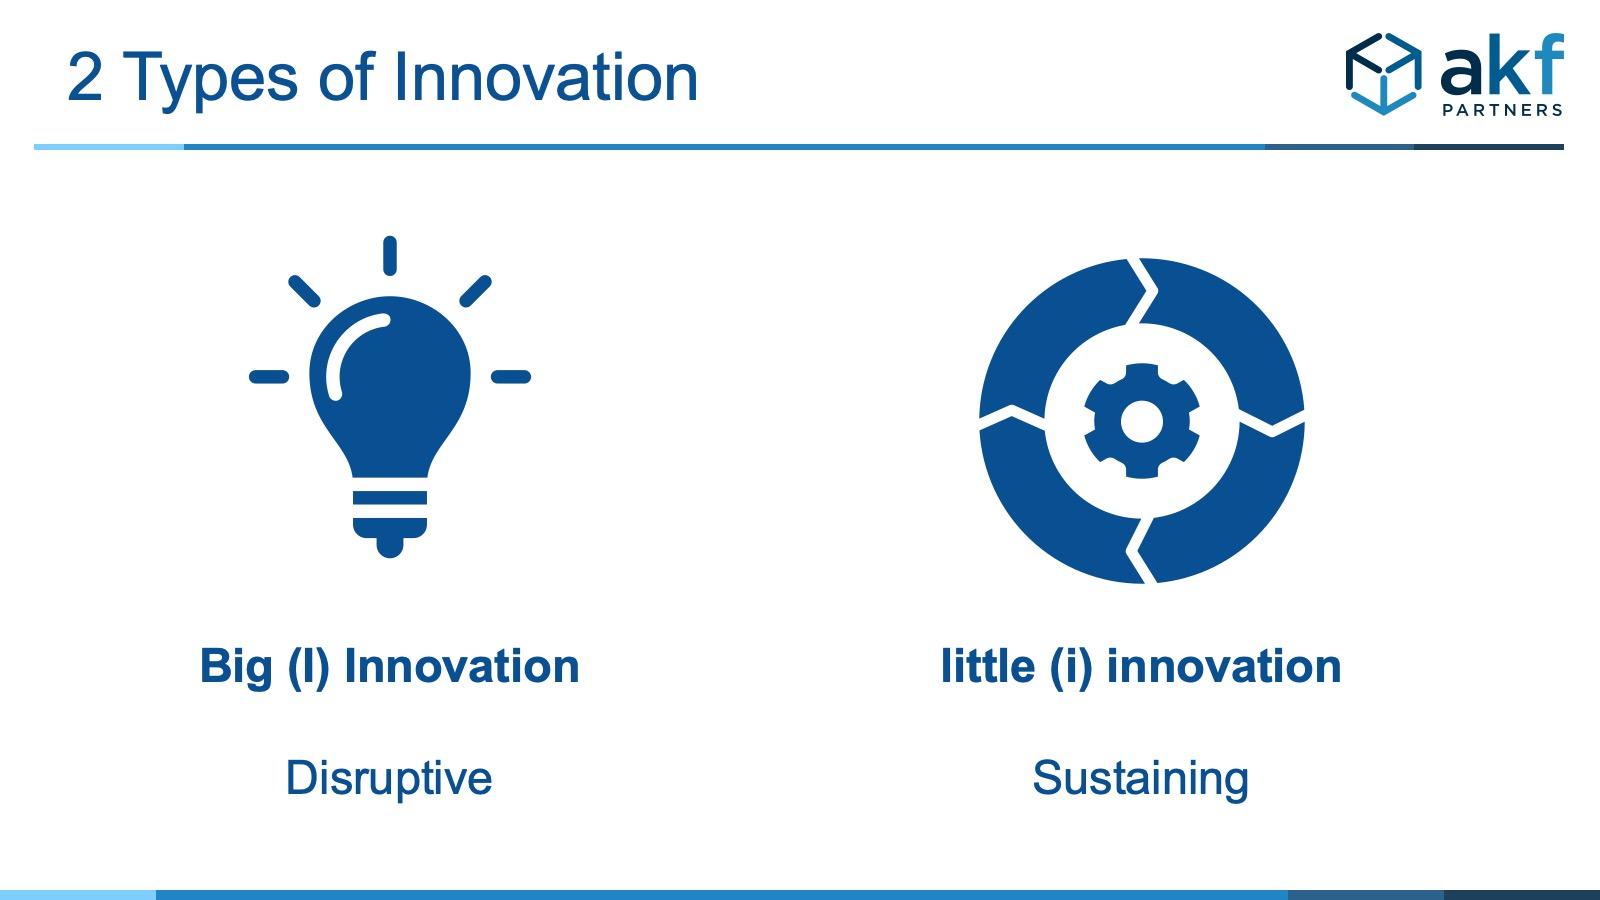 Two Types of Innovation